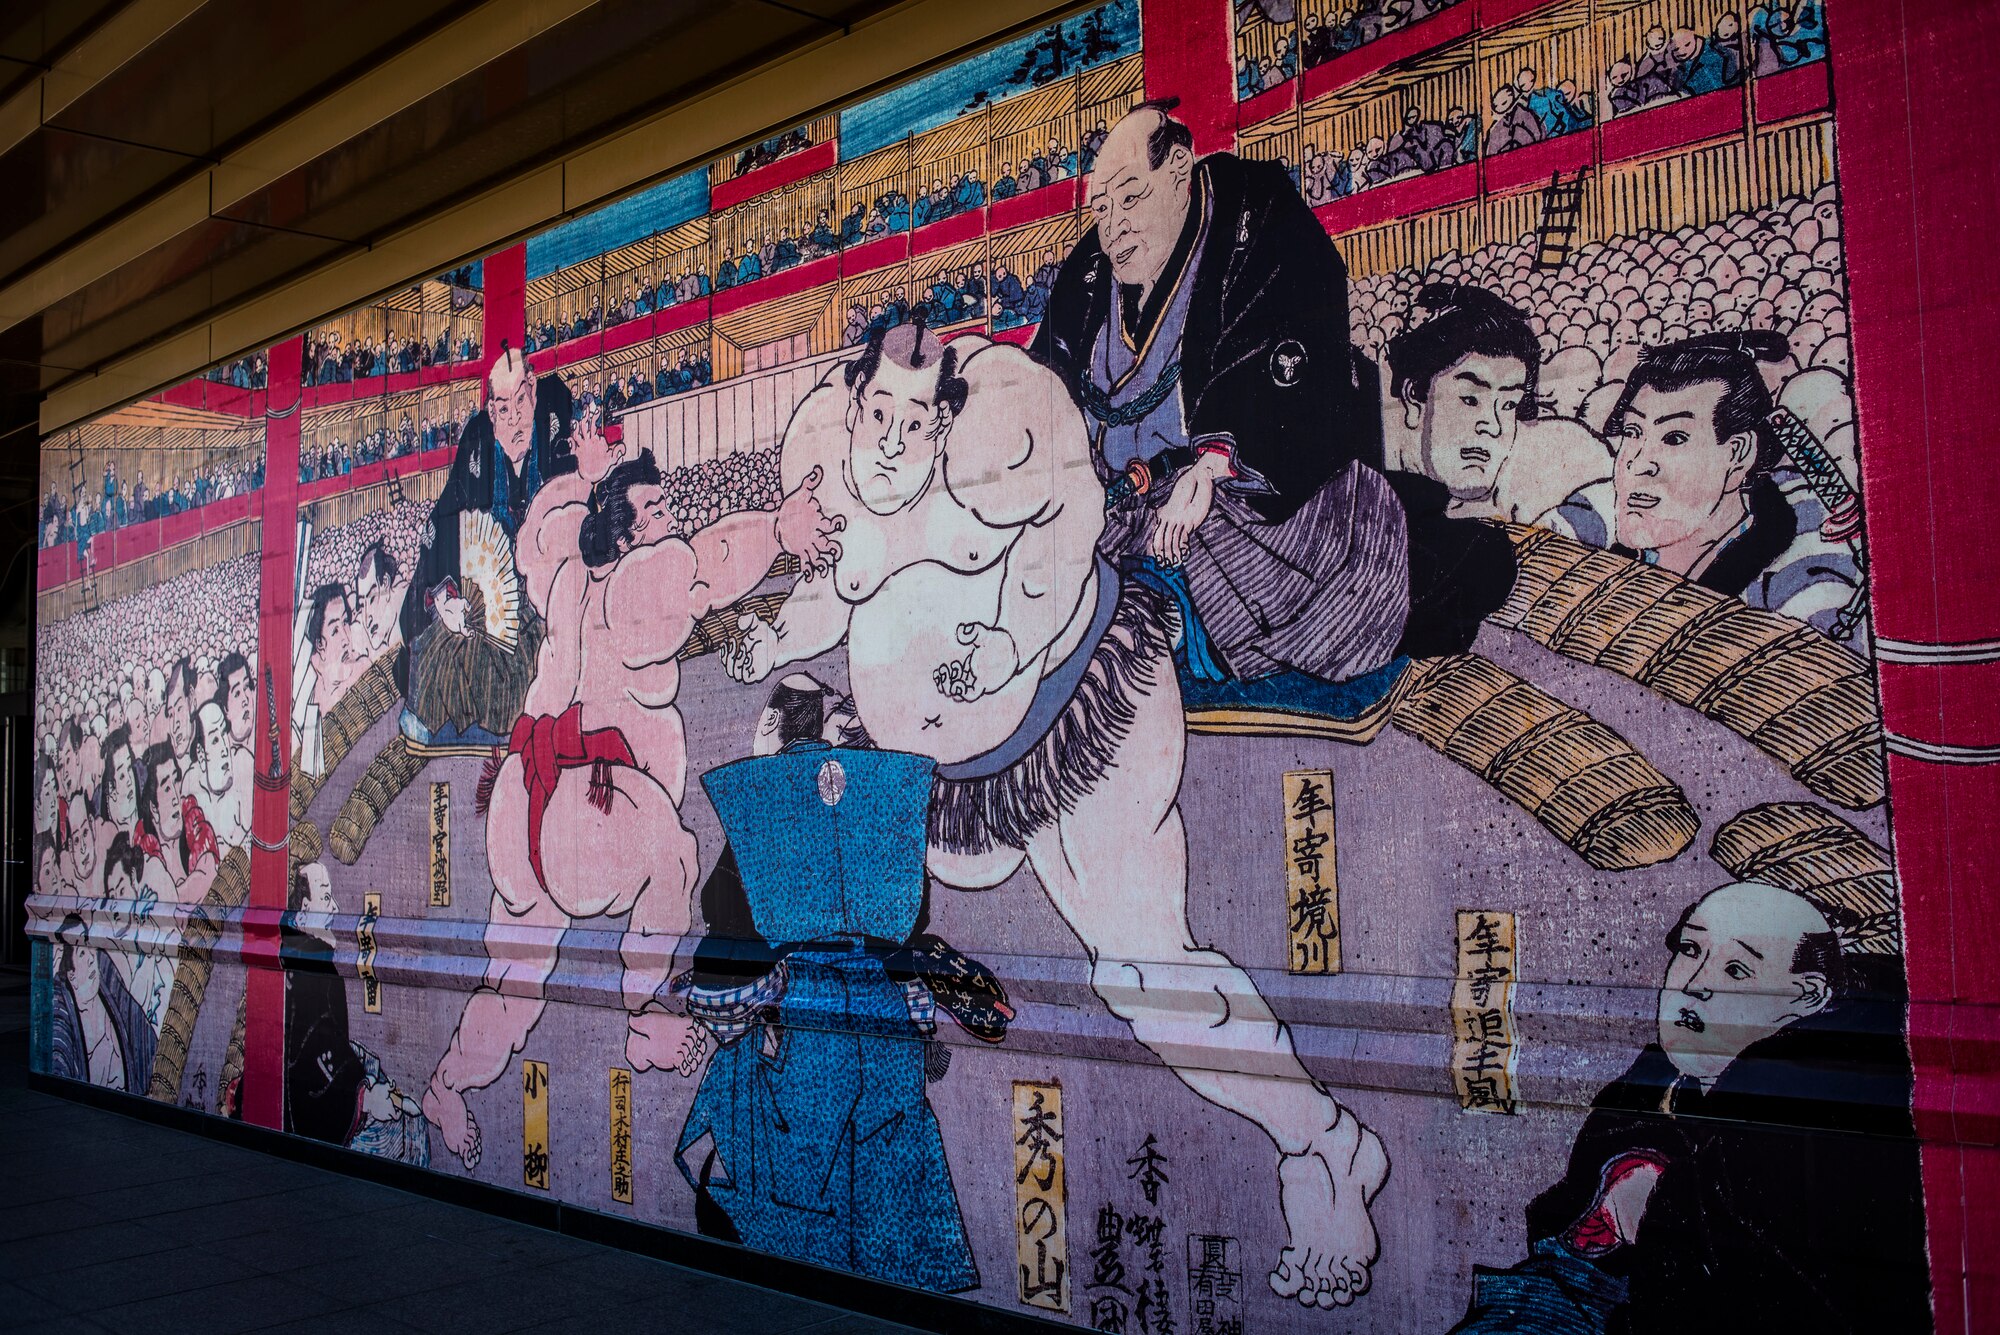 YOKOTA AIR BASE,Japan-- A Sumo mural adorns the outer wall of the Ryogoku Kokugikan Sumo Hall in Tokyo, Feb. 10, 2013. Thanks to Yokota Air Base’s Information, Tickets and Travel office, Yokota Airmen had the unique opportunity to experience Sumo first-hand. (U.S. Air Force photo by Capt. Raymond Geoffroy)